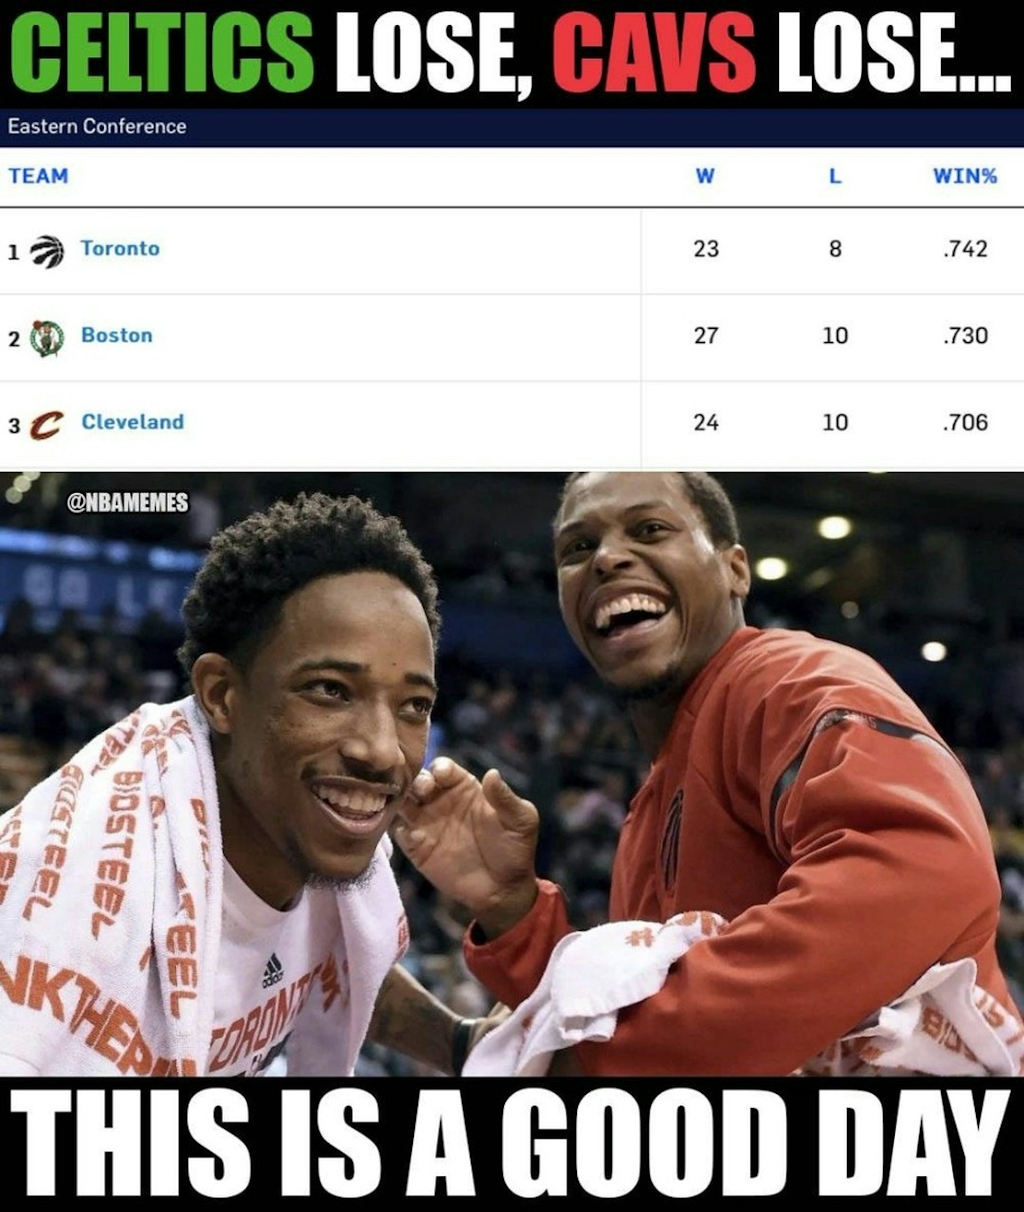 #RaptorsNation in first place right now!